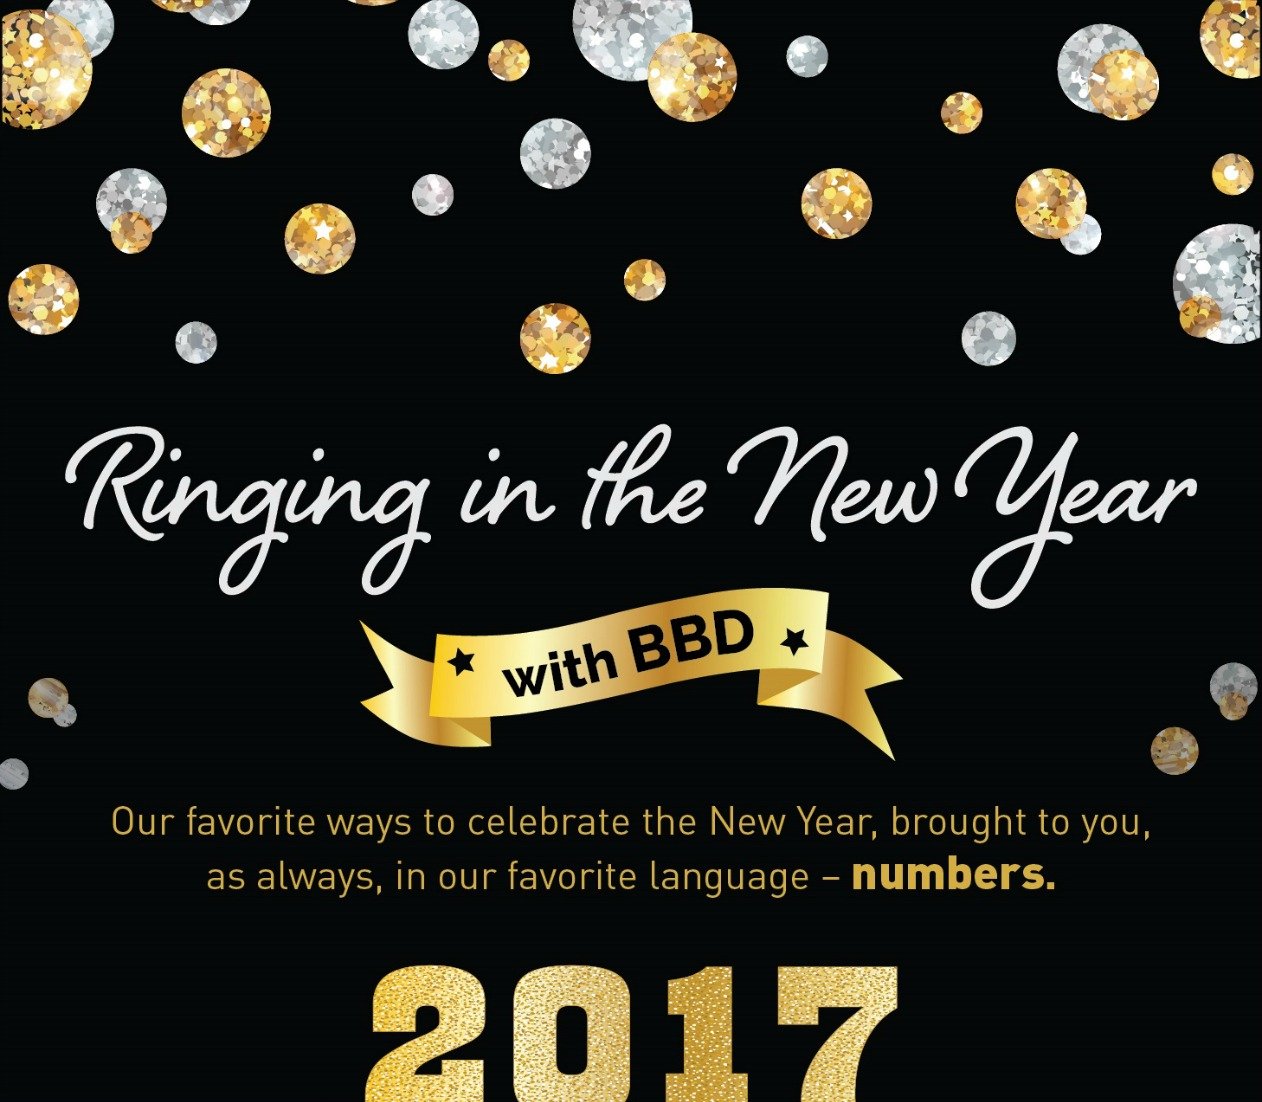 Happy New Year From BBD!